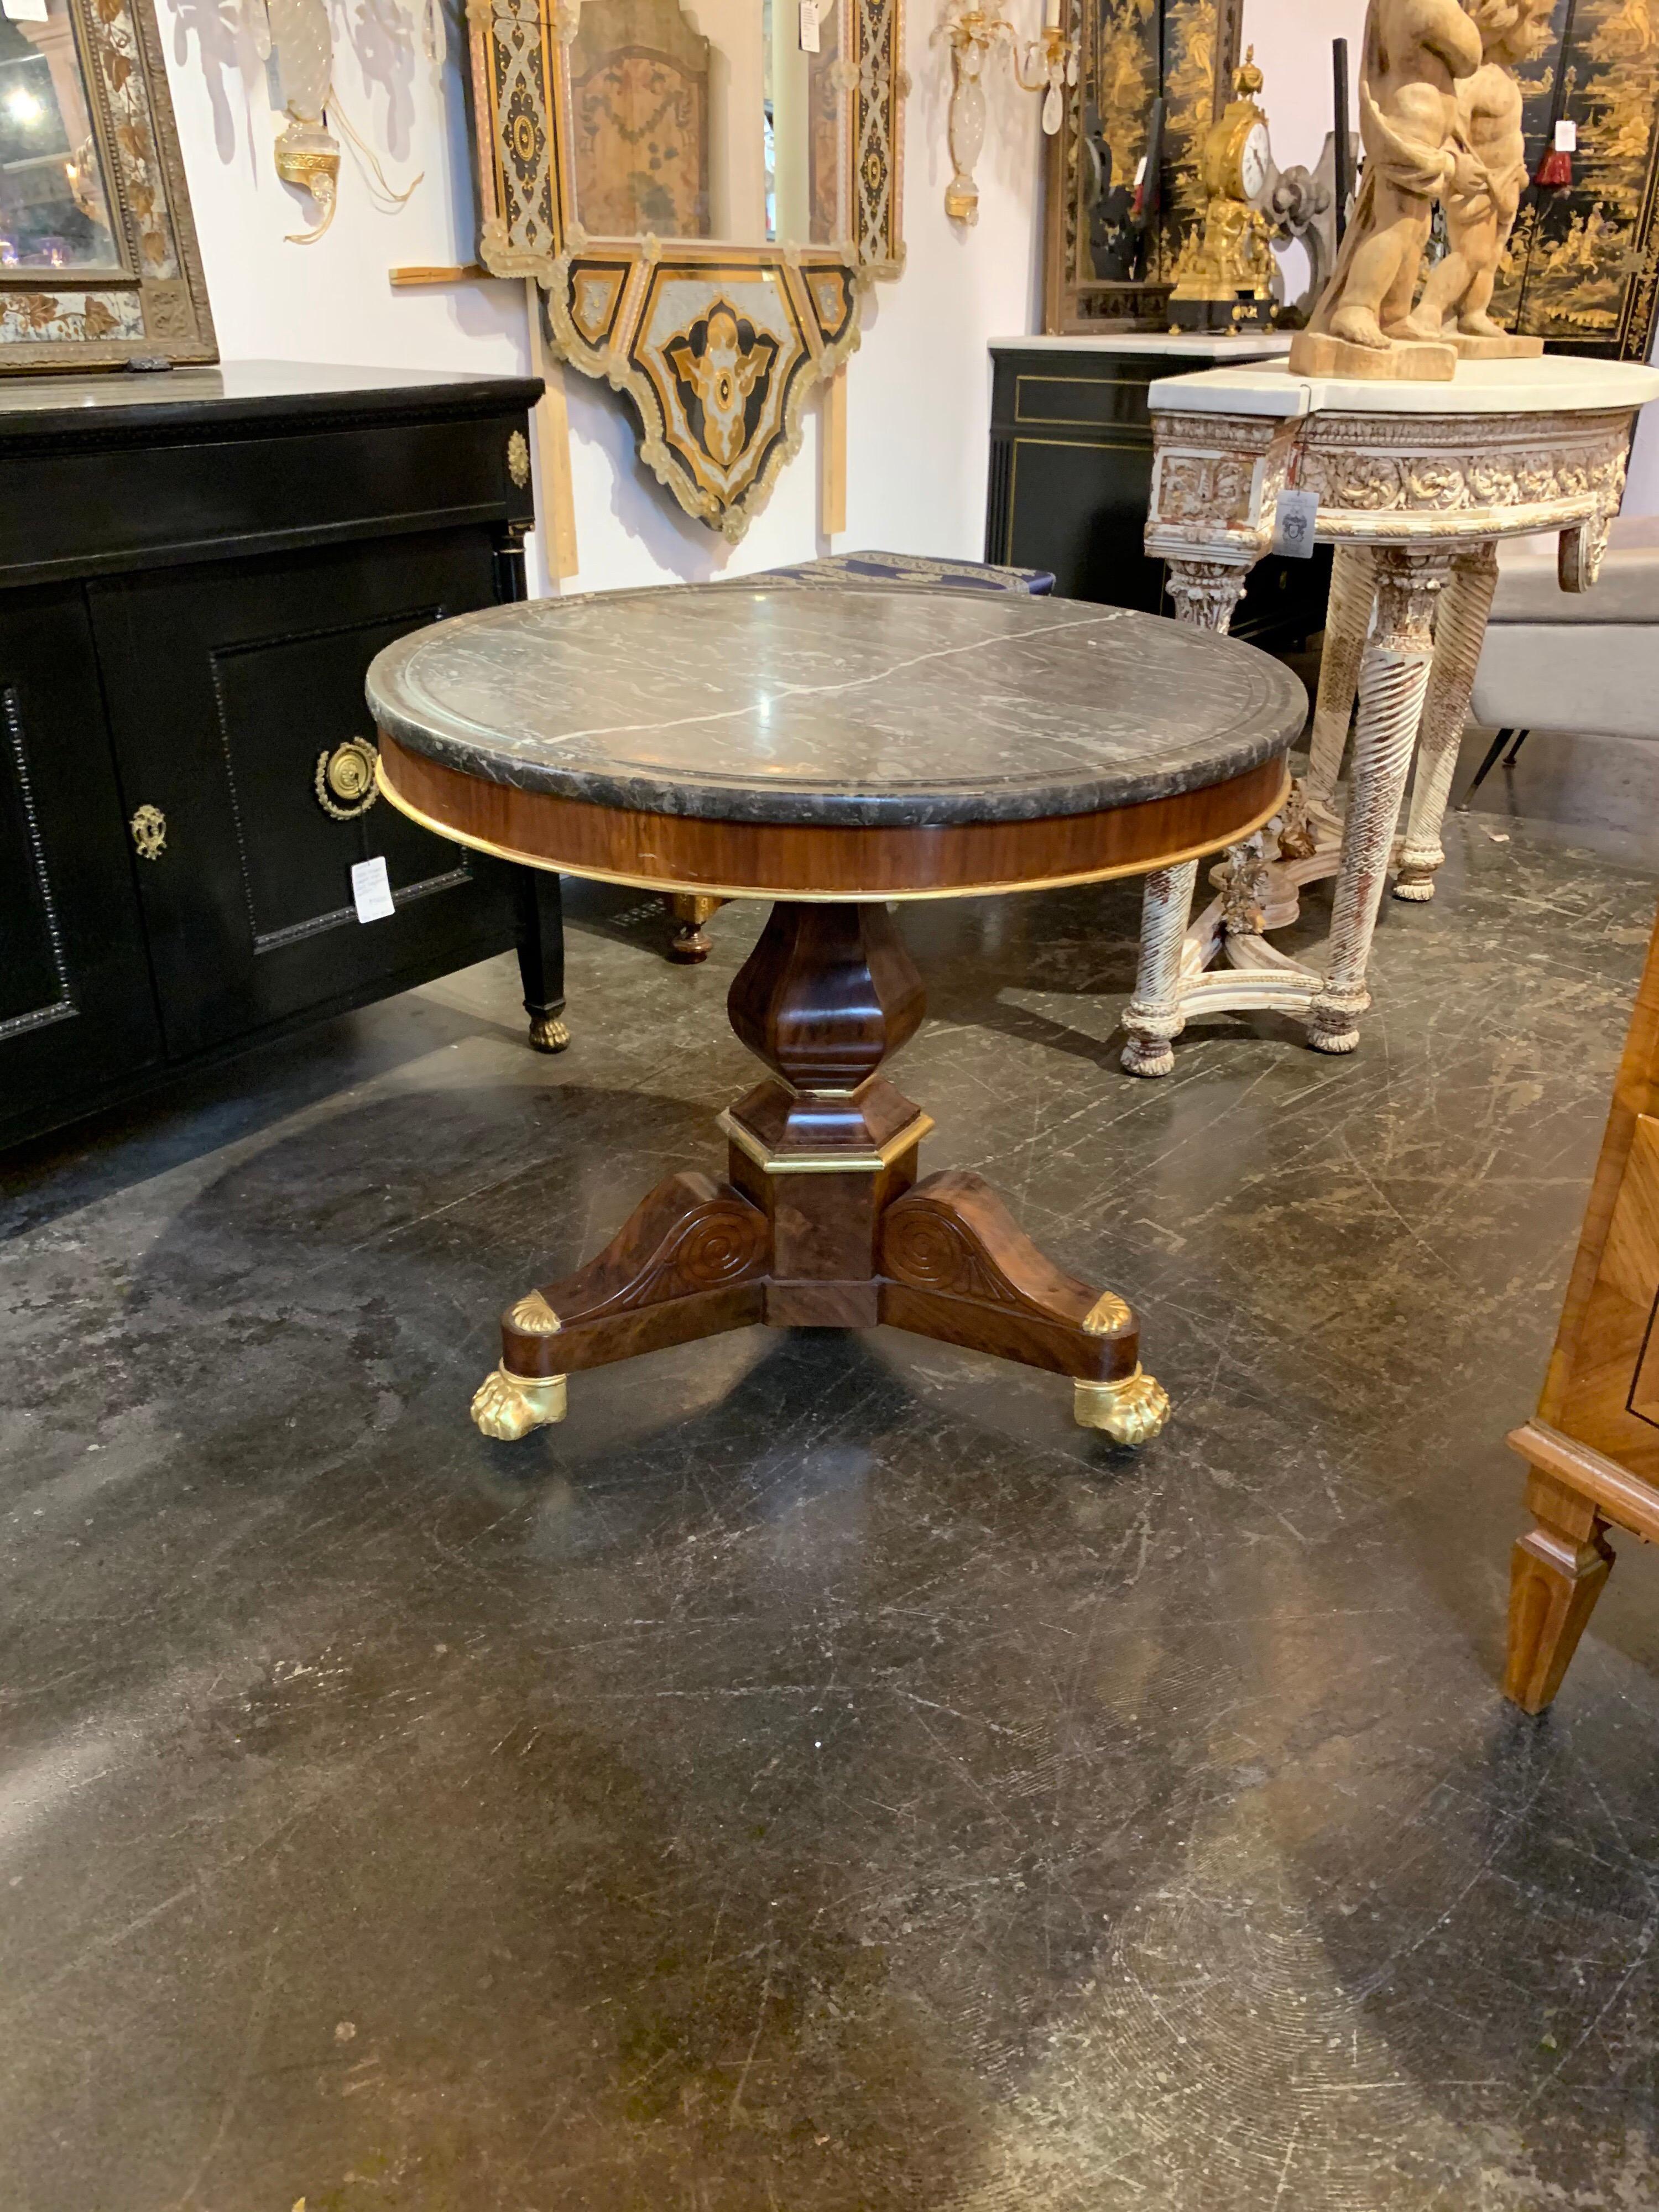 Elegant 19th century French Charles X-mahogany side table with grey marble top. The table has a lovely base with gold gilt details. Very pretty!